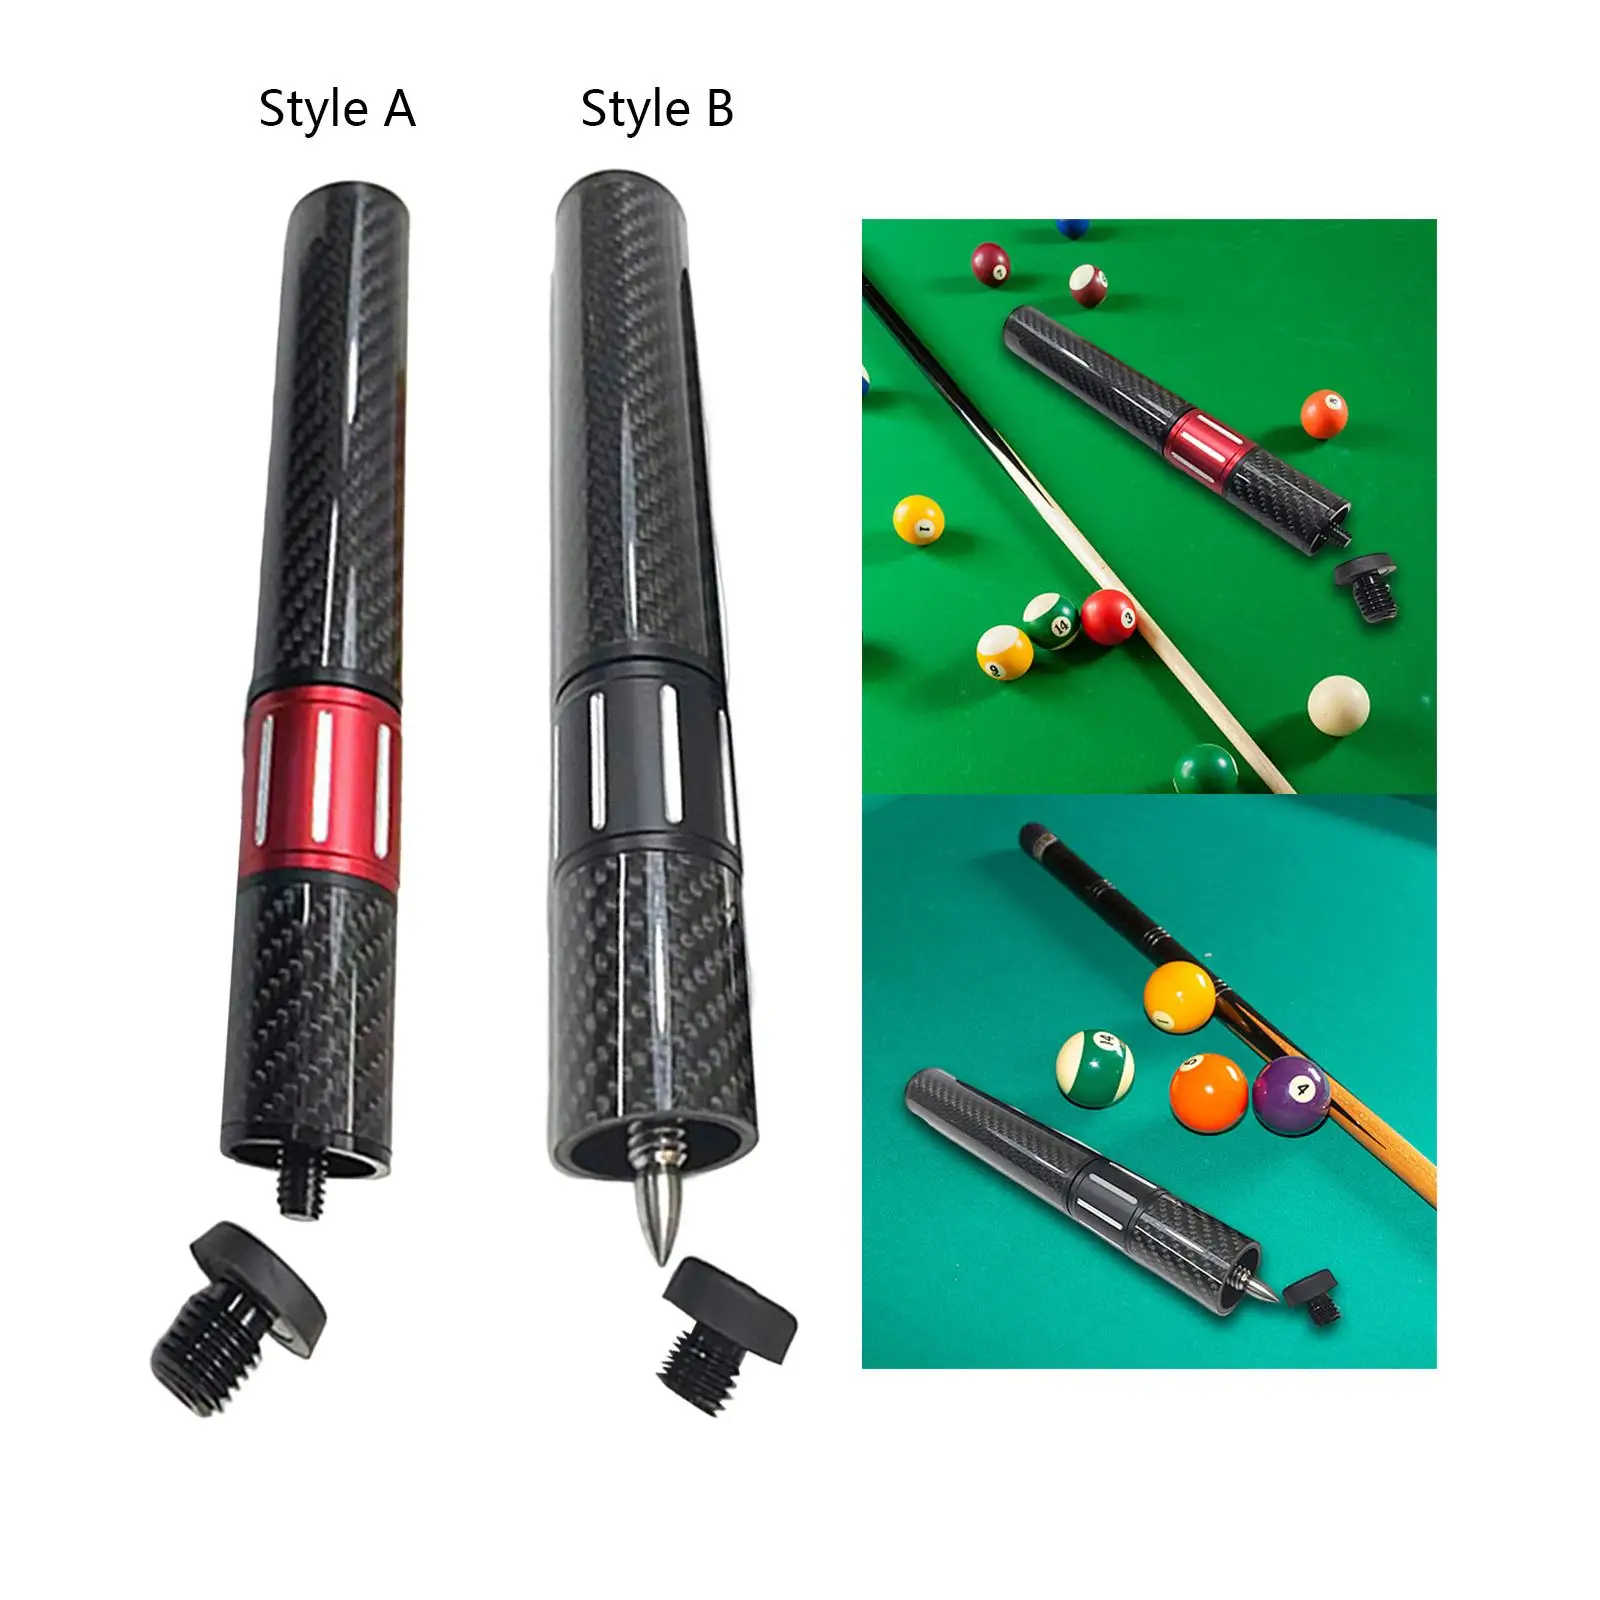 Snooker Cue Extend Lightweight Cue Joint Accessories Billiard Connect Shaft Telescopic Pool Cue Extension for Snooker Beginners